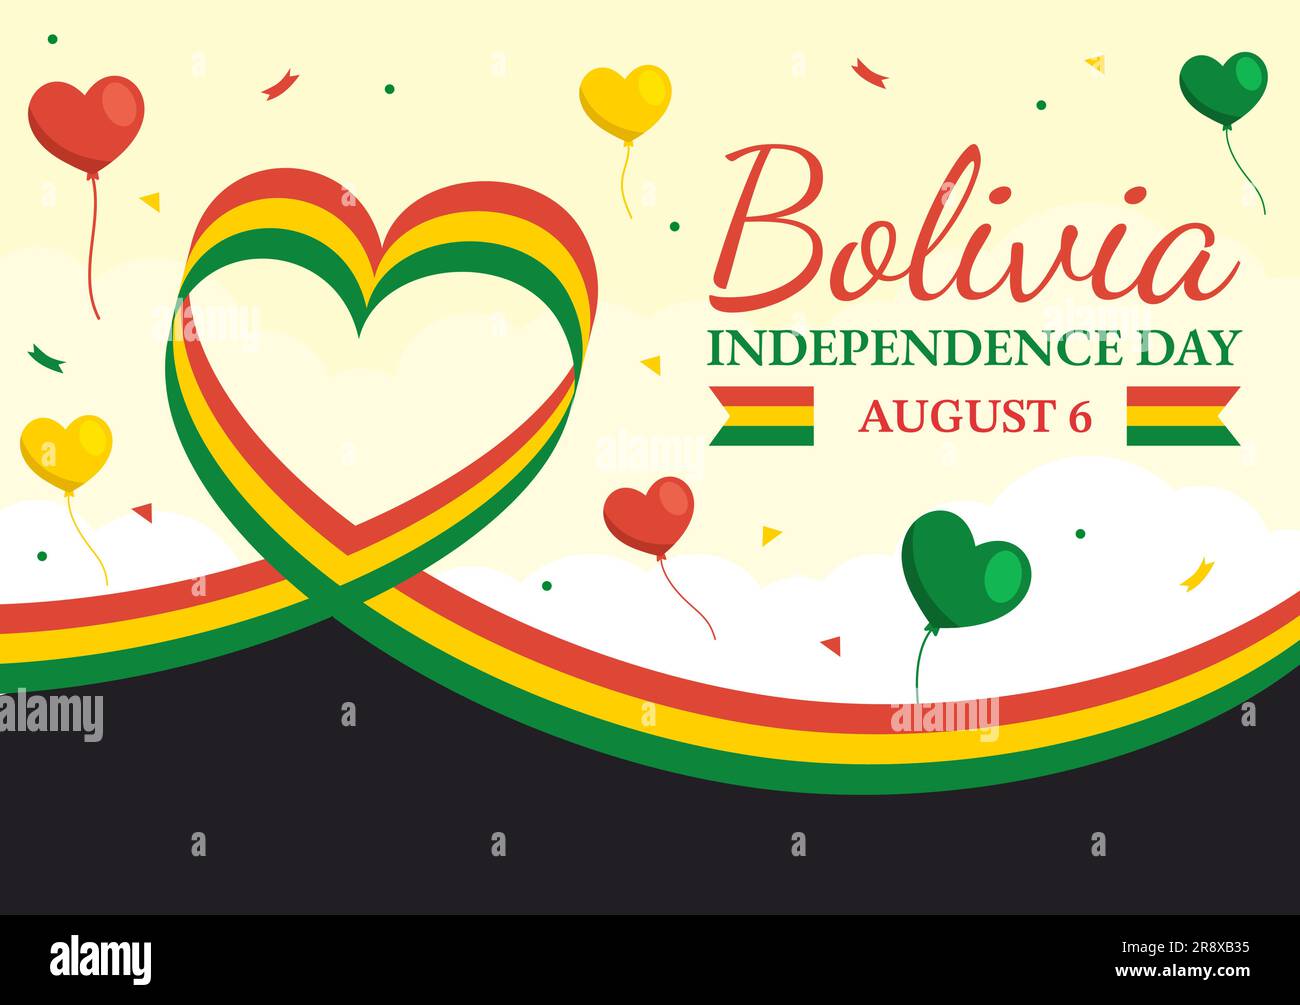 Bolivia Independence Day Vector Illustration on 6 August with festival ...